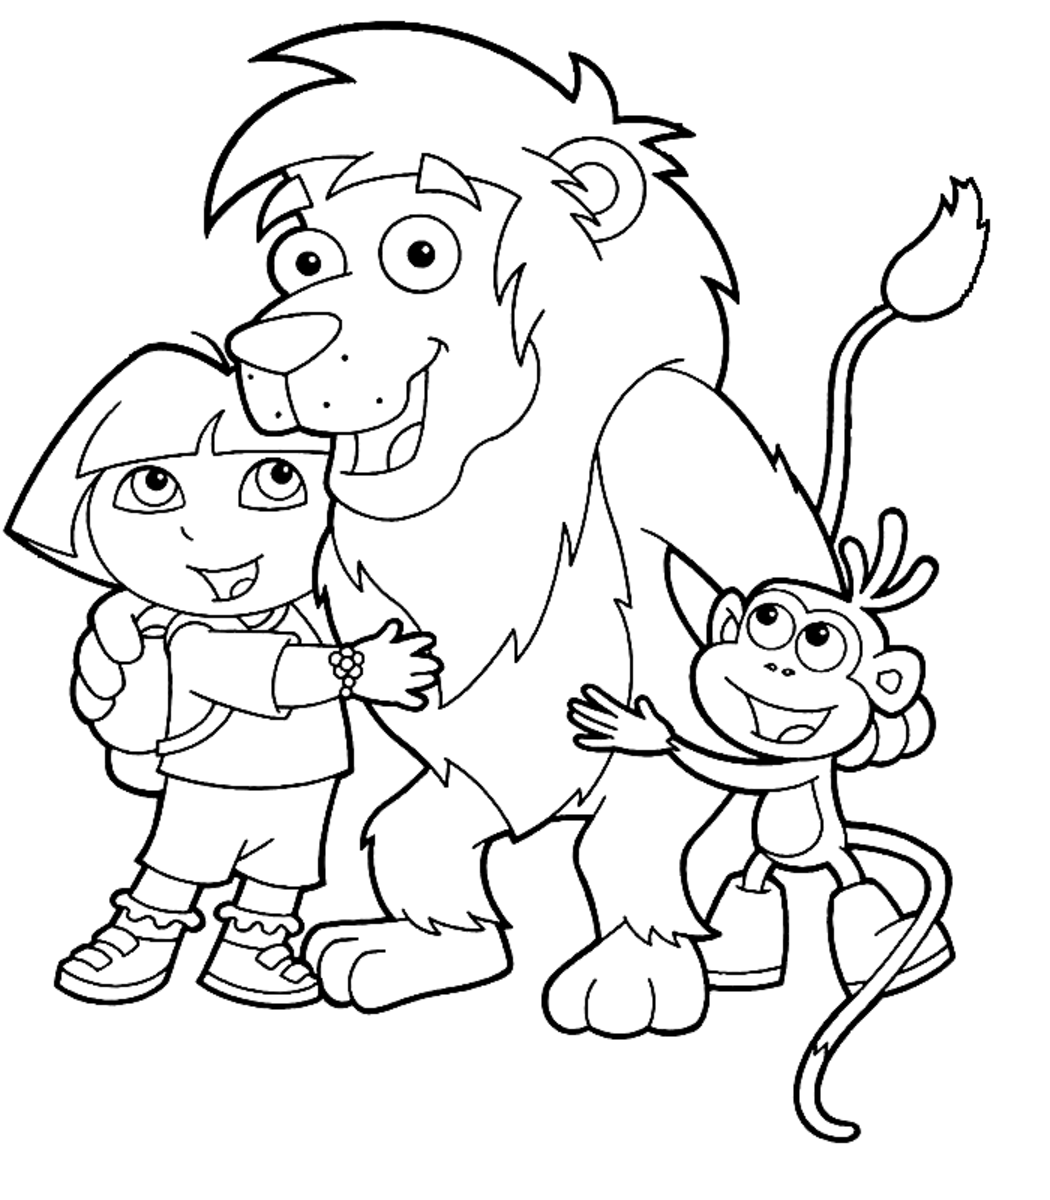 Dora the Explorer Printable Coloring Pages HubPages